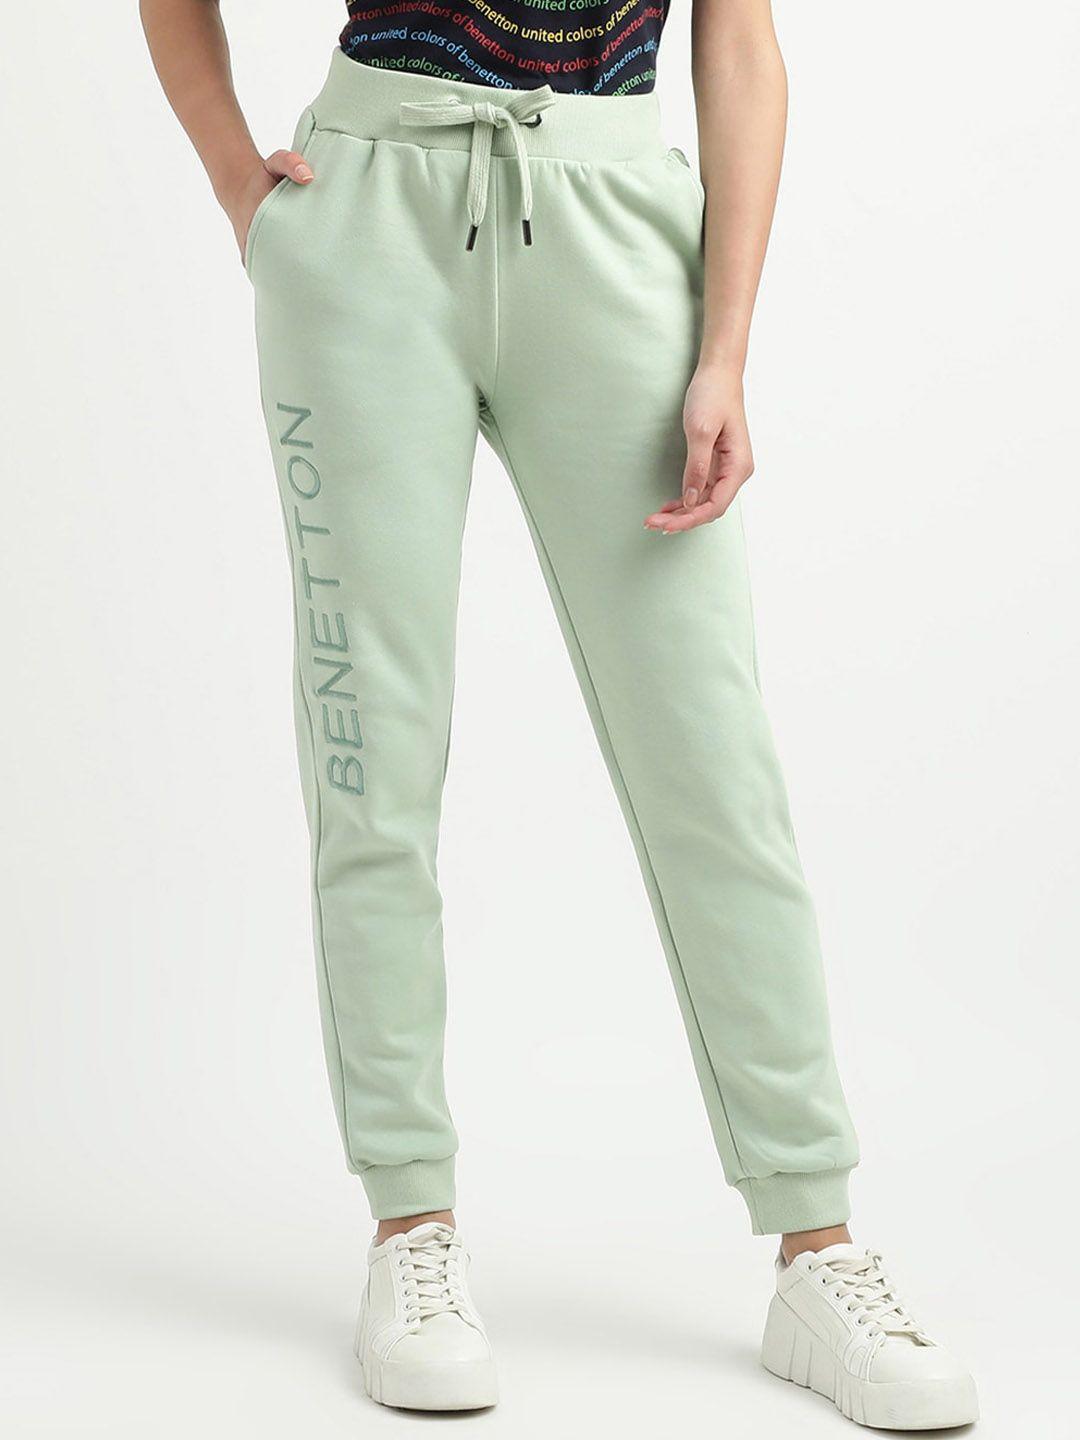 united colors of benetton women green solid joggers